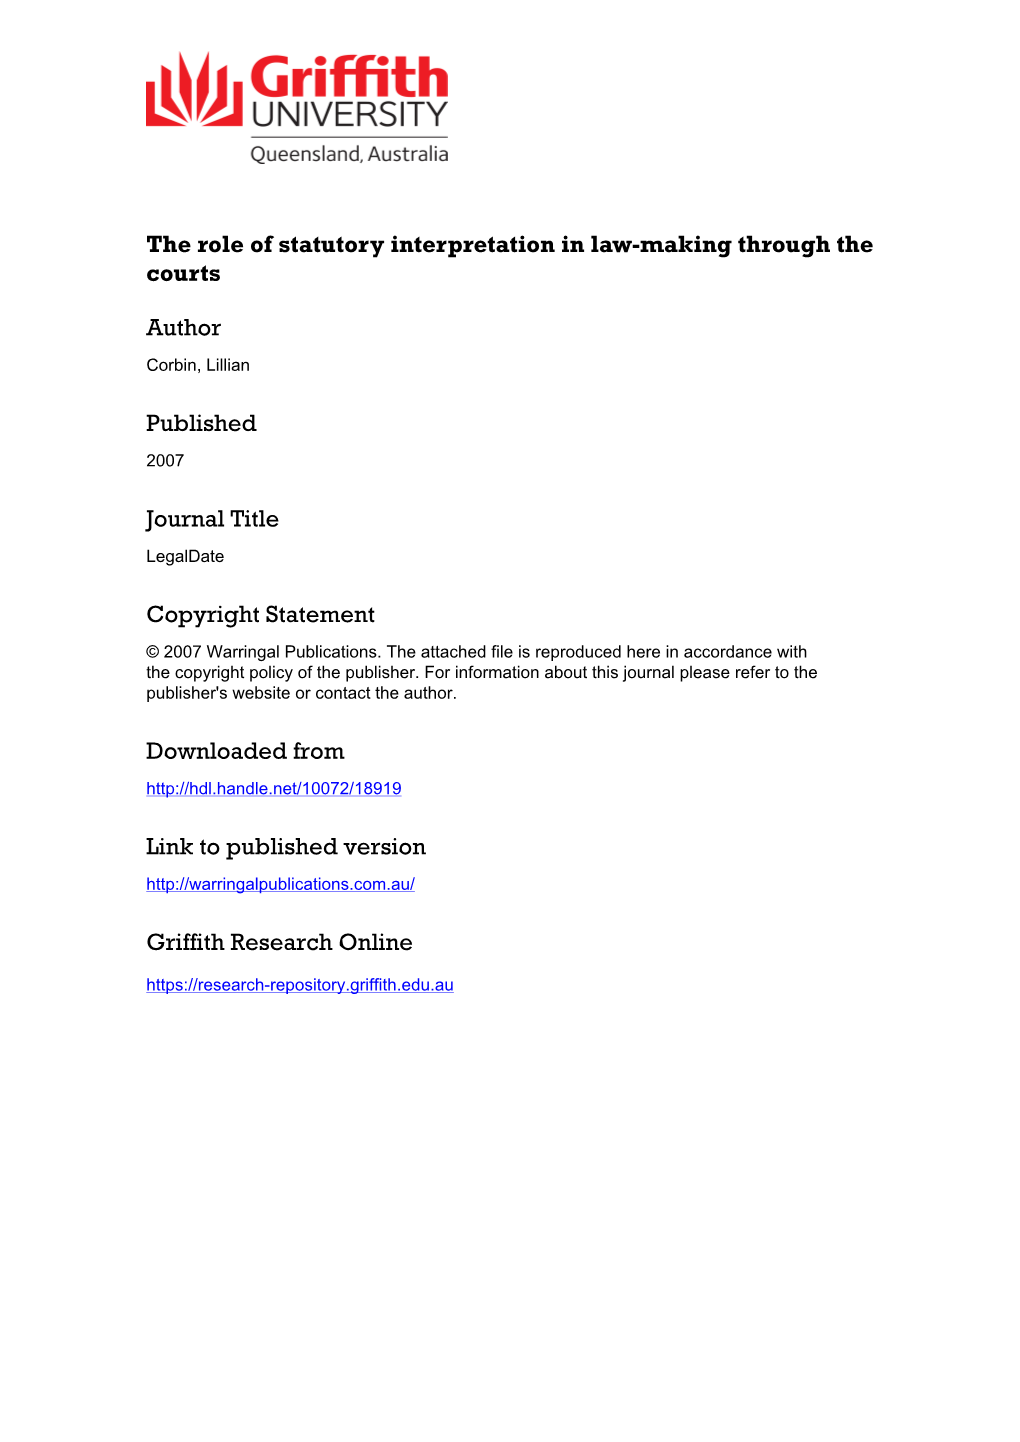 The Role of Statutory Interpretation in Law-Making Through the Courts